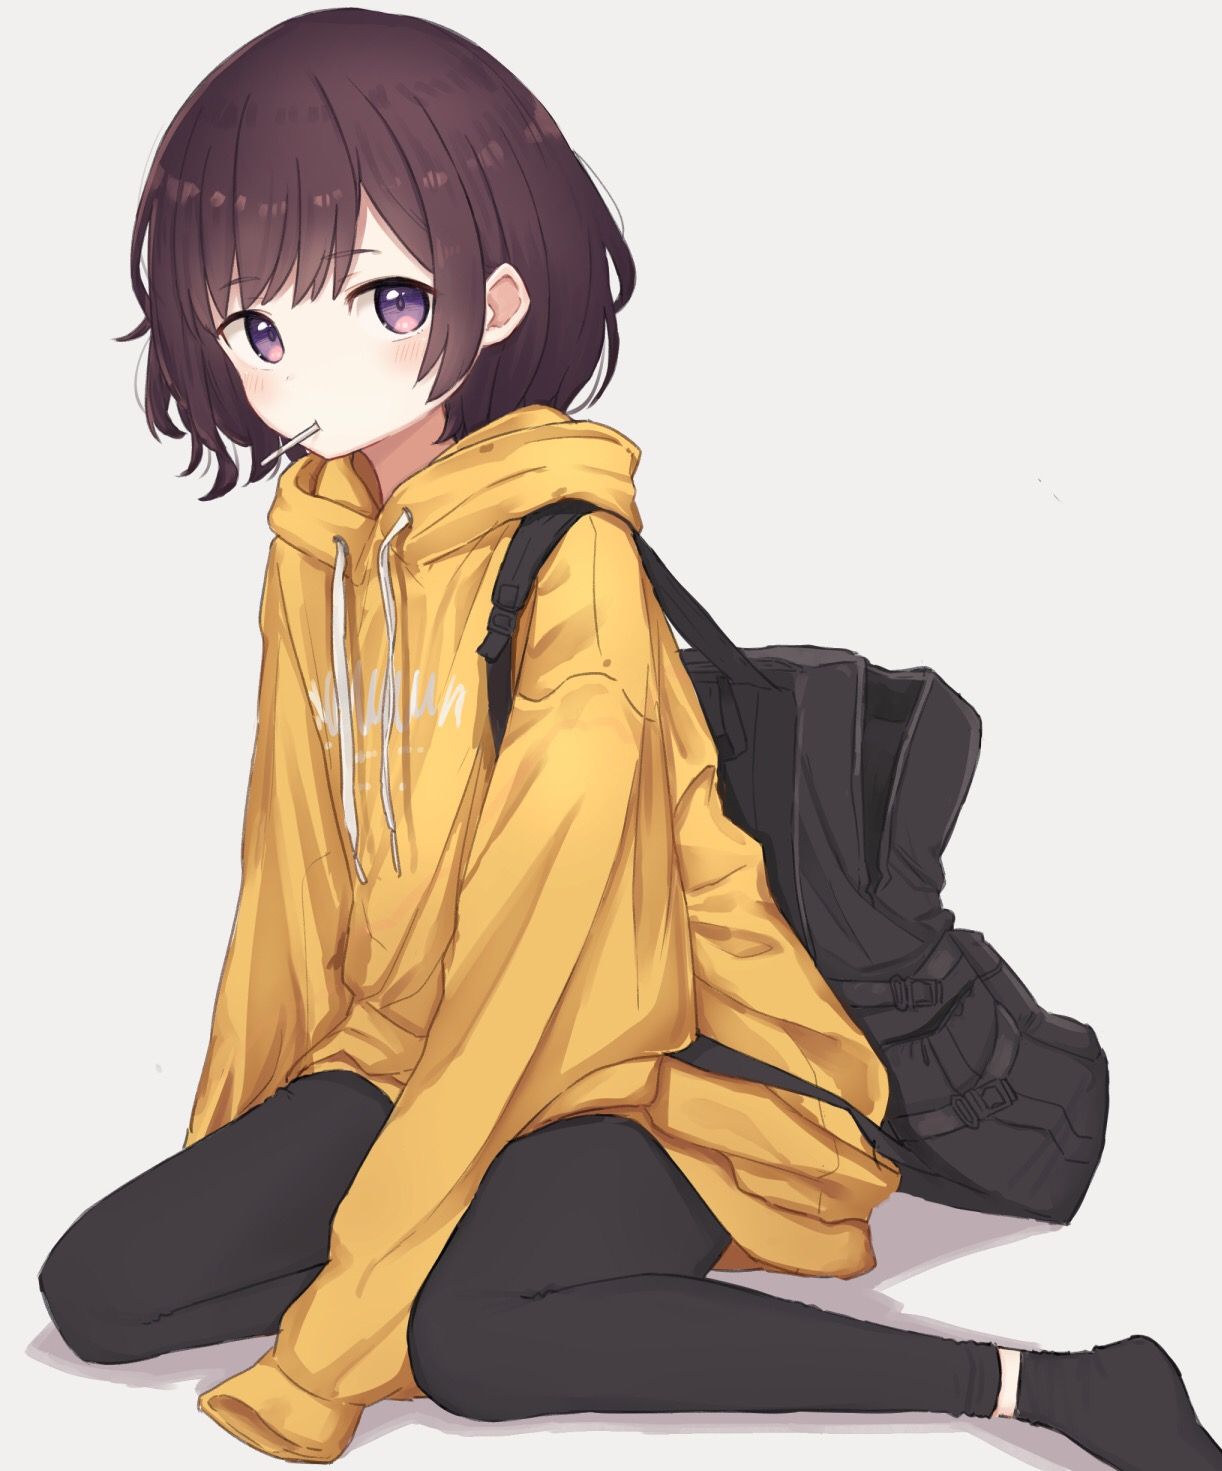 Download Png - Anime Girl With Short Blonde Hair And Brown Eyes - Free  Transparent PNG Download - PNGkey